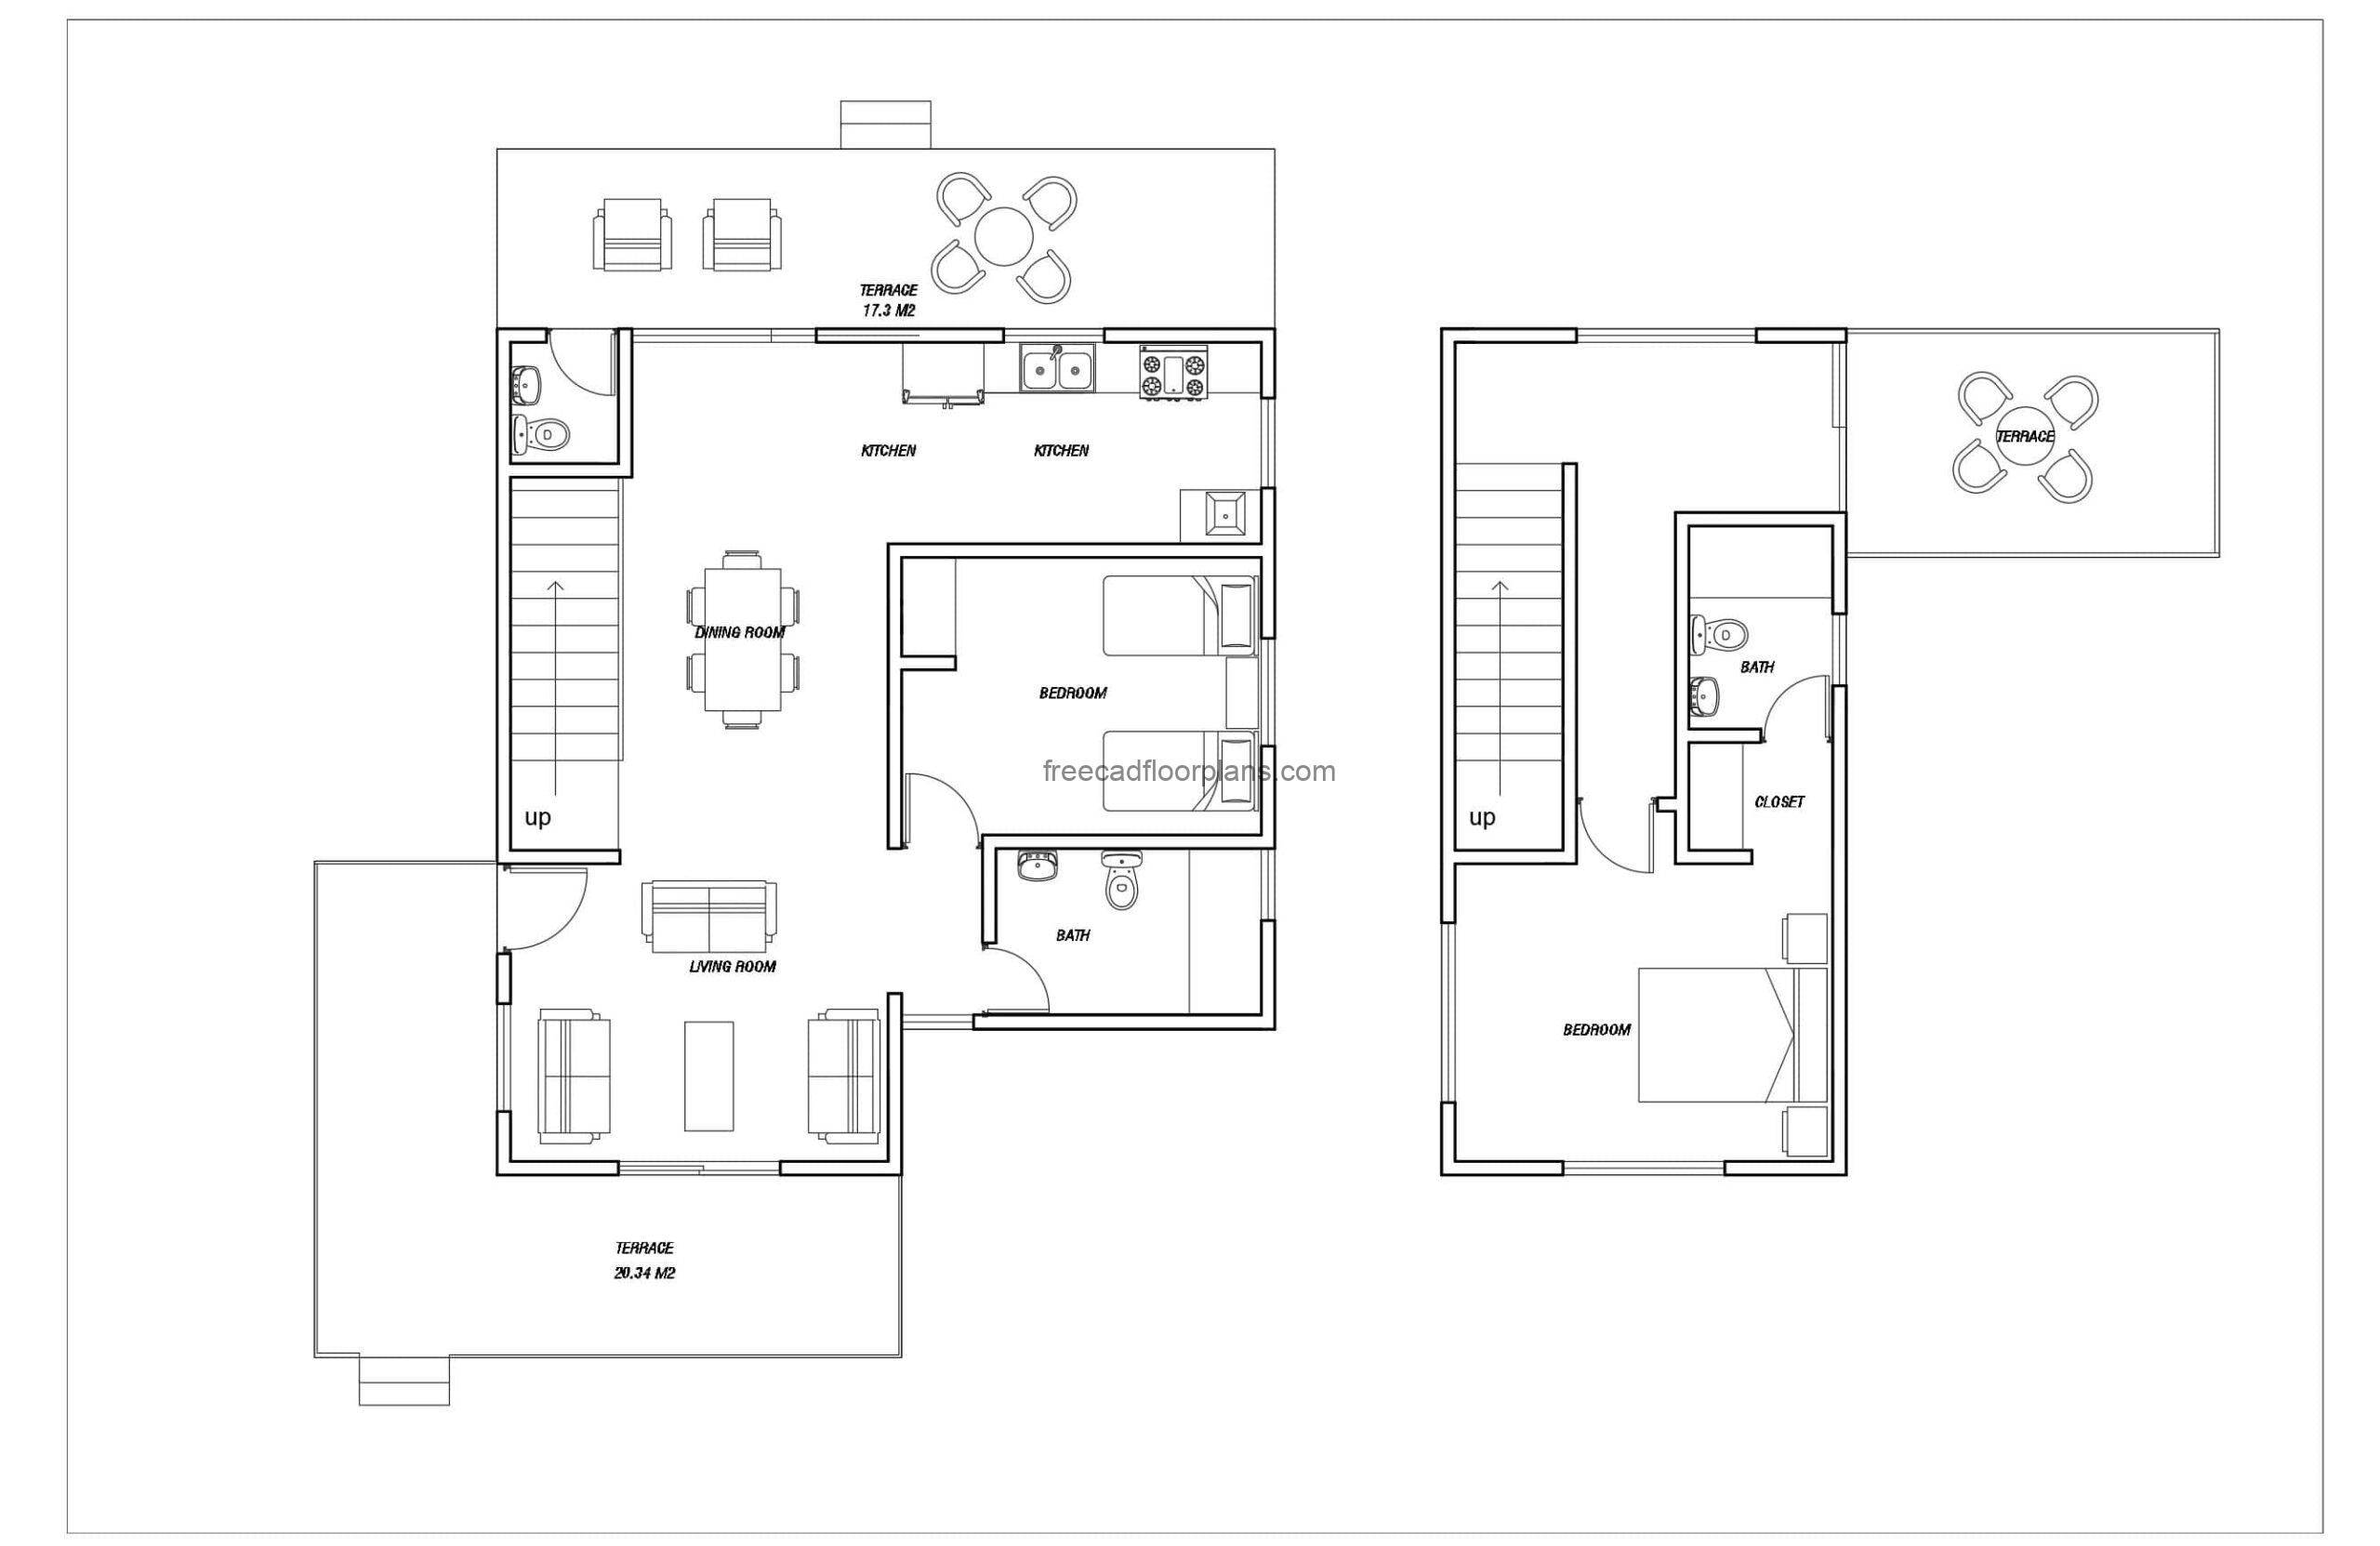 Drawing of a two storey house with 1700 sq.ft. plan in dwg AutoCAD format